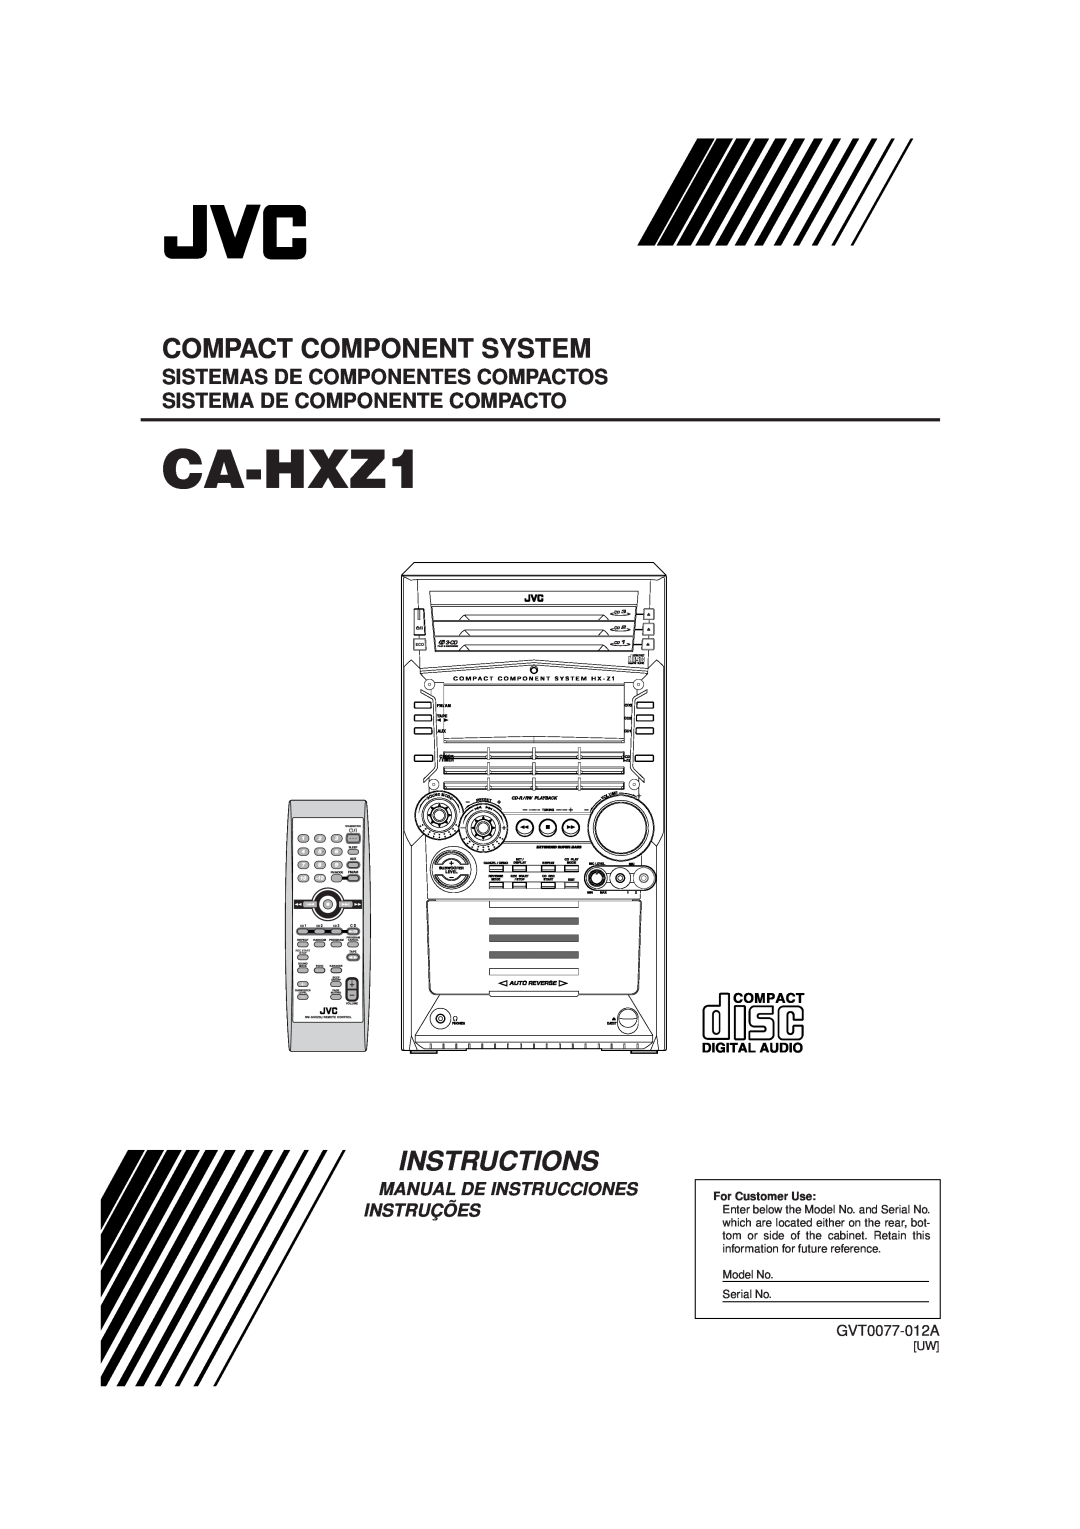 JVC CA-HXZ1R manual Compact Component System, Instructions, For Customer Use, Eset, Olume, Compact Digital Audio 